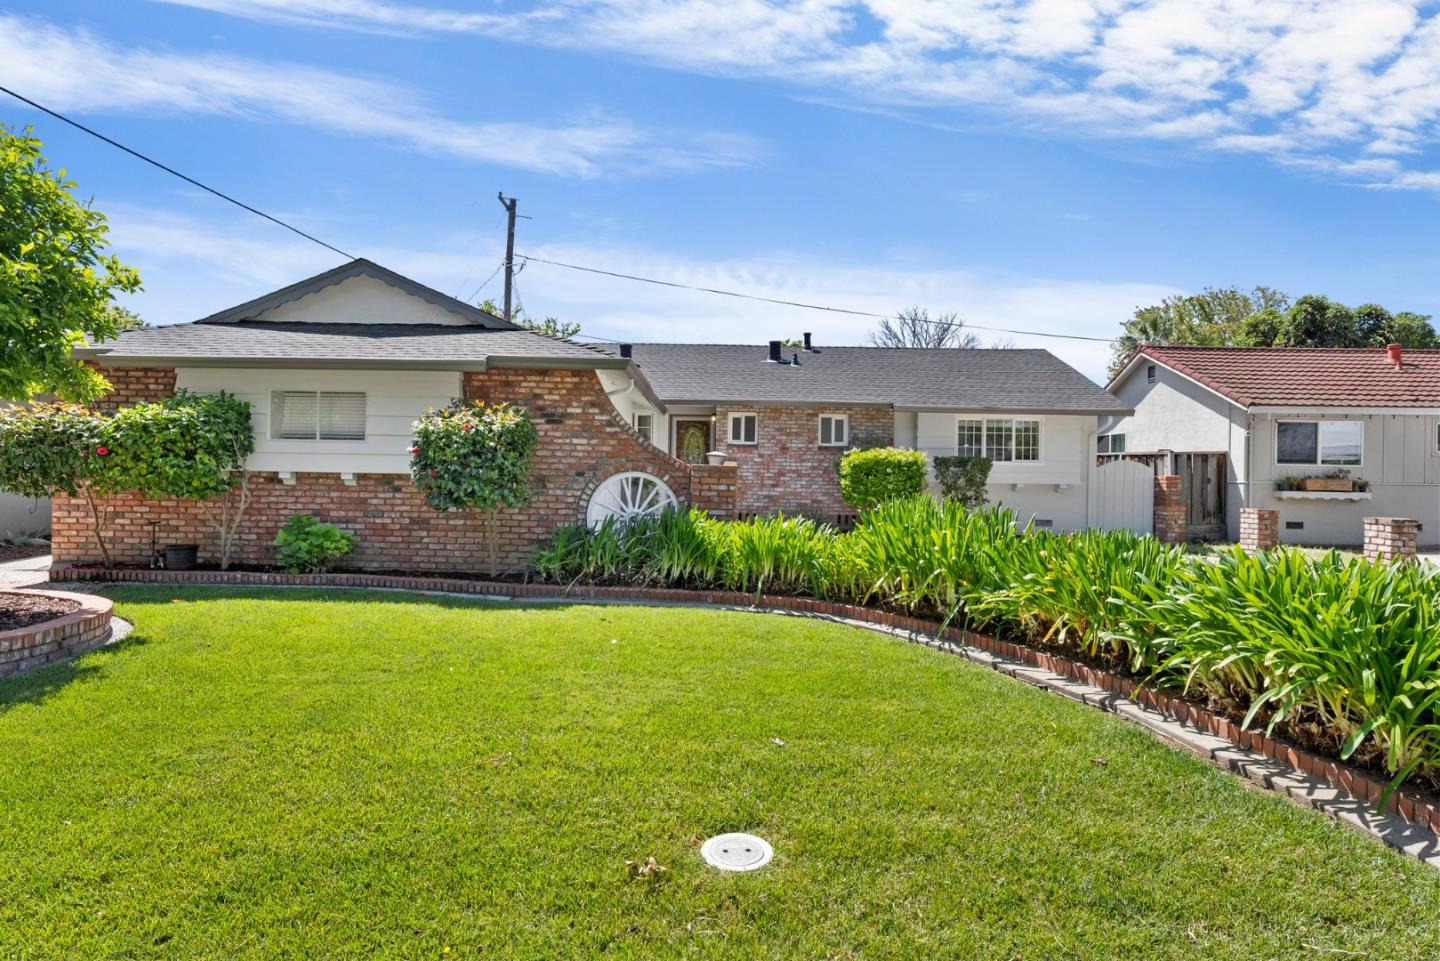 Photo of 1514 Willowgate Dr in San Jose, CA